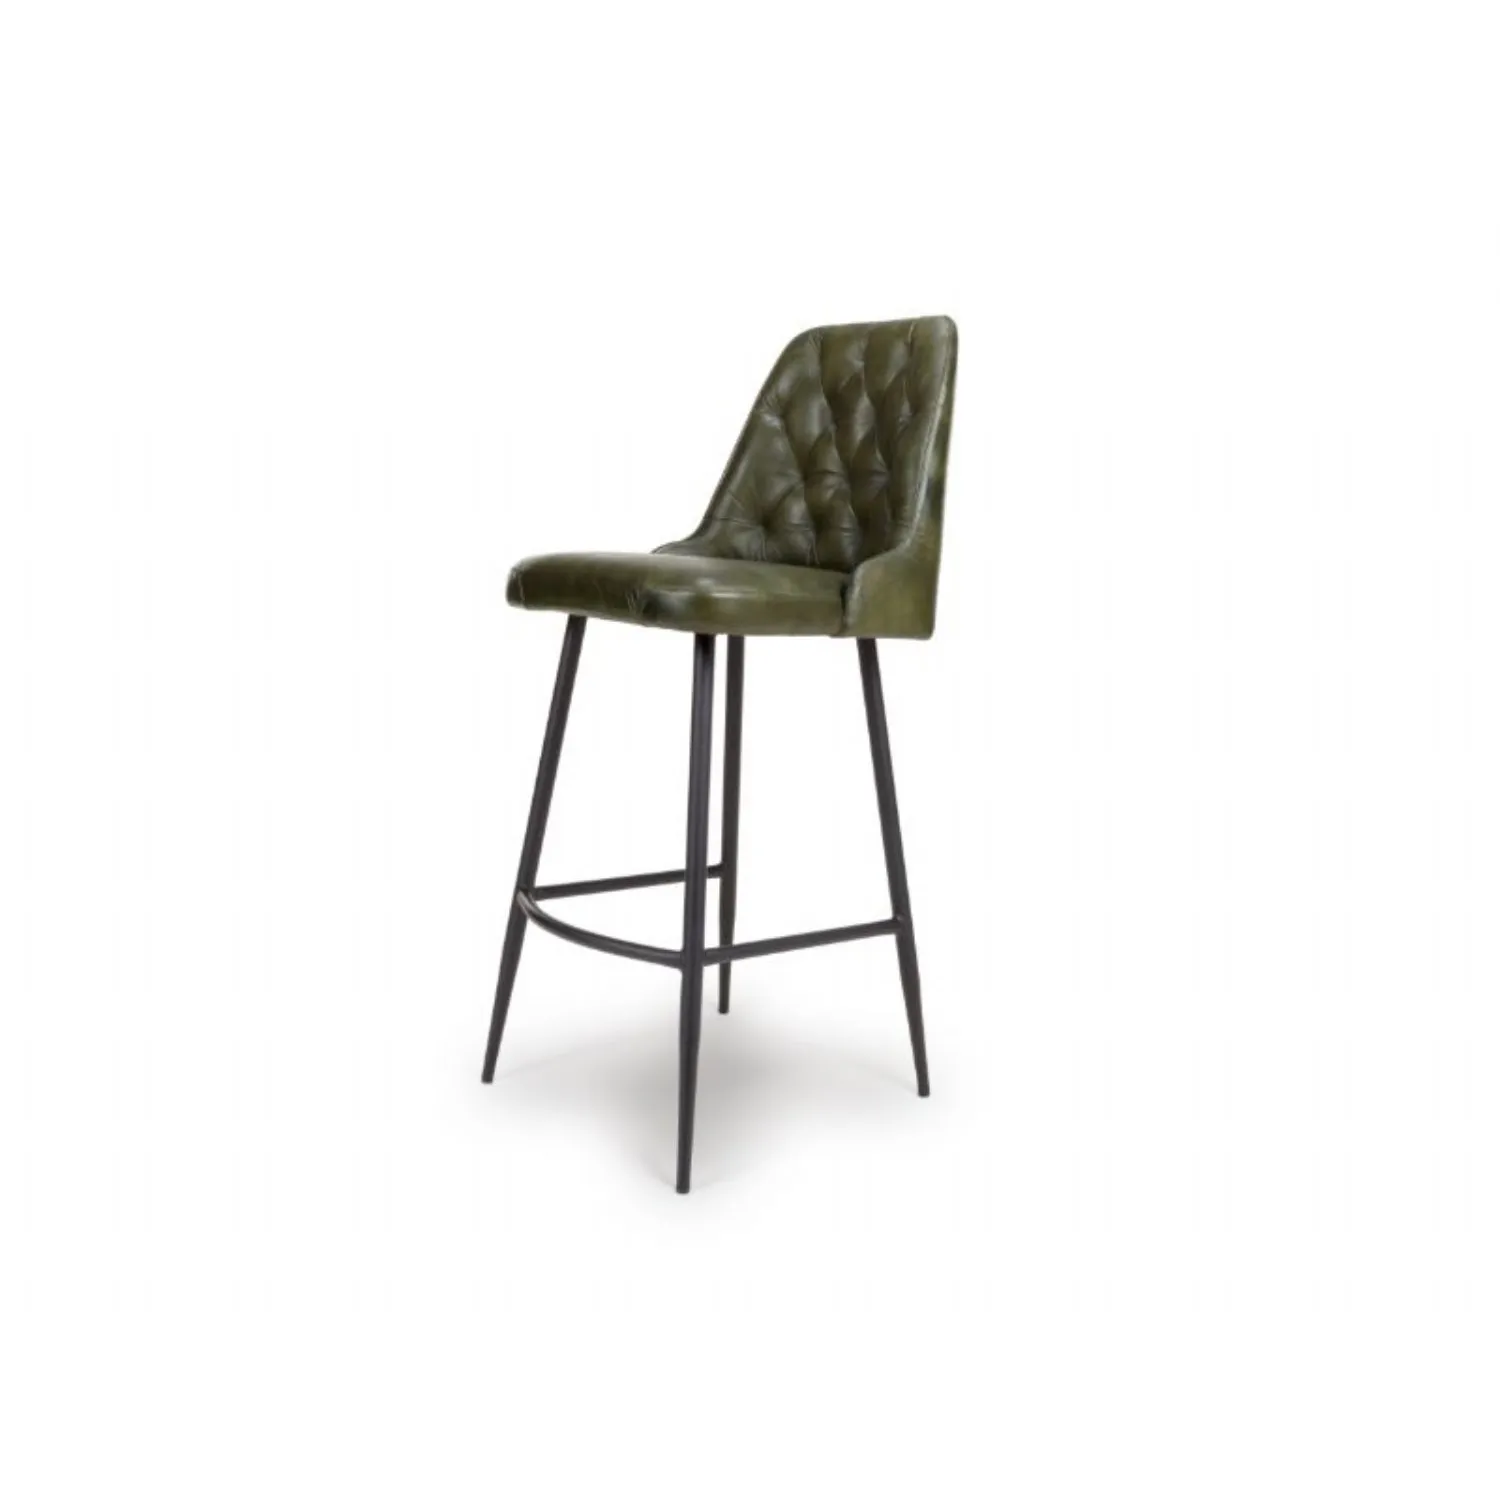 Green Leather Bar Chair with Black Metal Legs